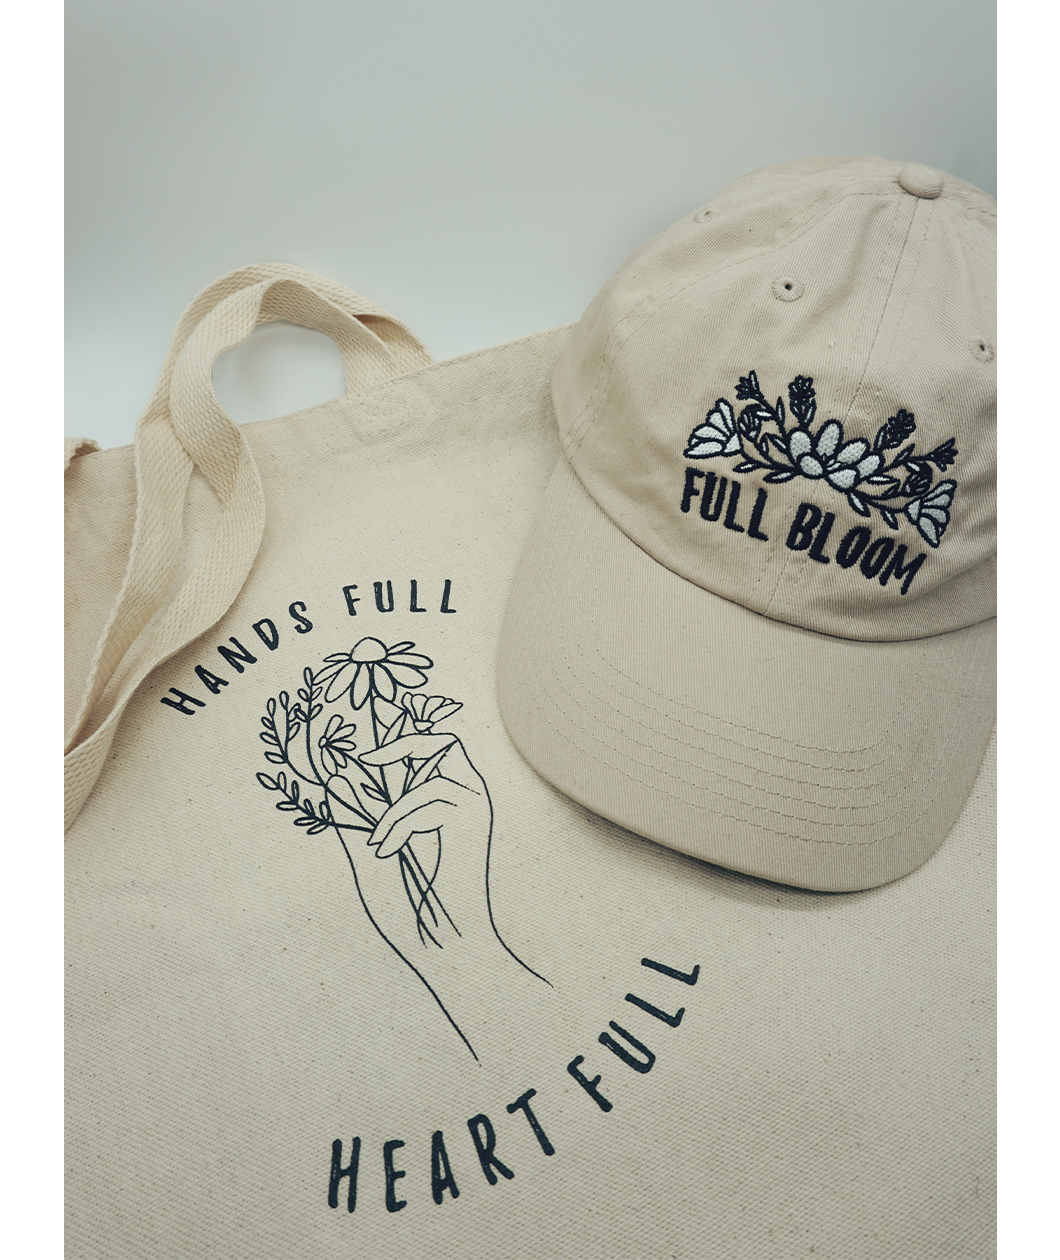 Close up of the canvas tote from Sierra Schultzzie with the words "Hands Full, Heart Full" printed in black as well as an outline of a hand holding flowers. On top of the tote in a beige ball cap with the embroidered words "Full Bloom" and flowers. 